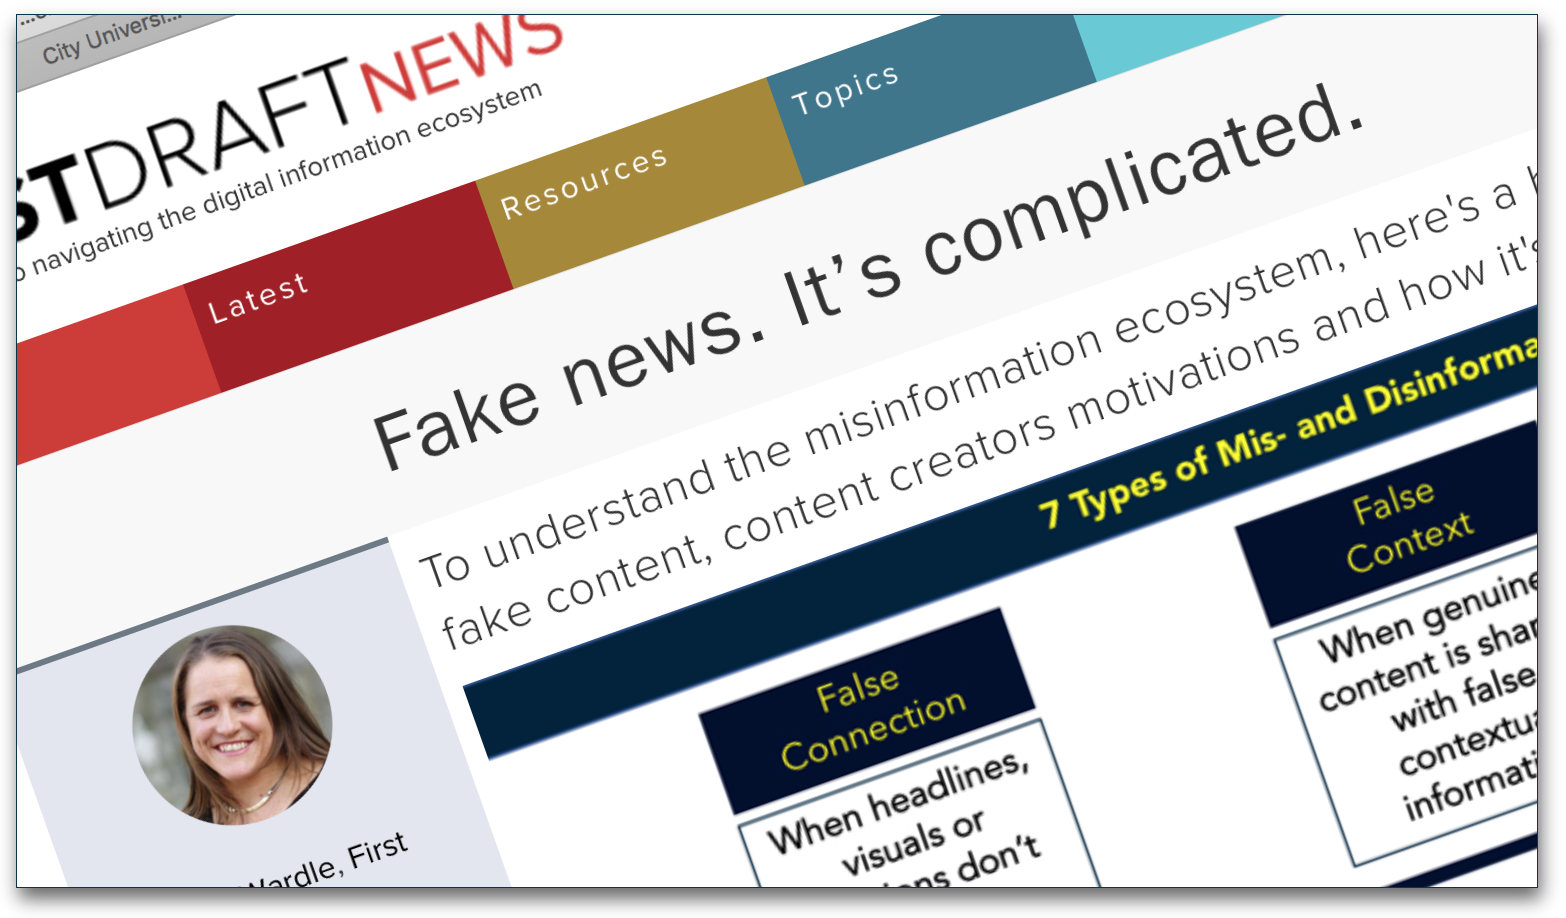 Defining the real forms of Fake News